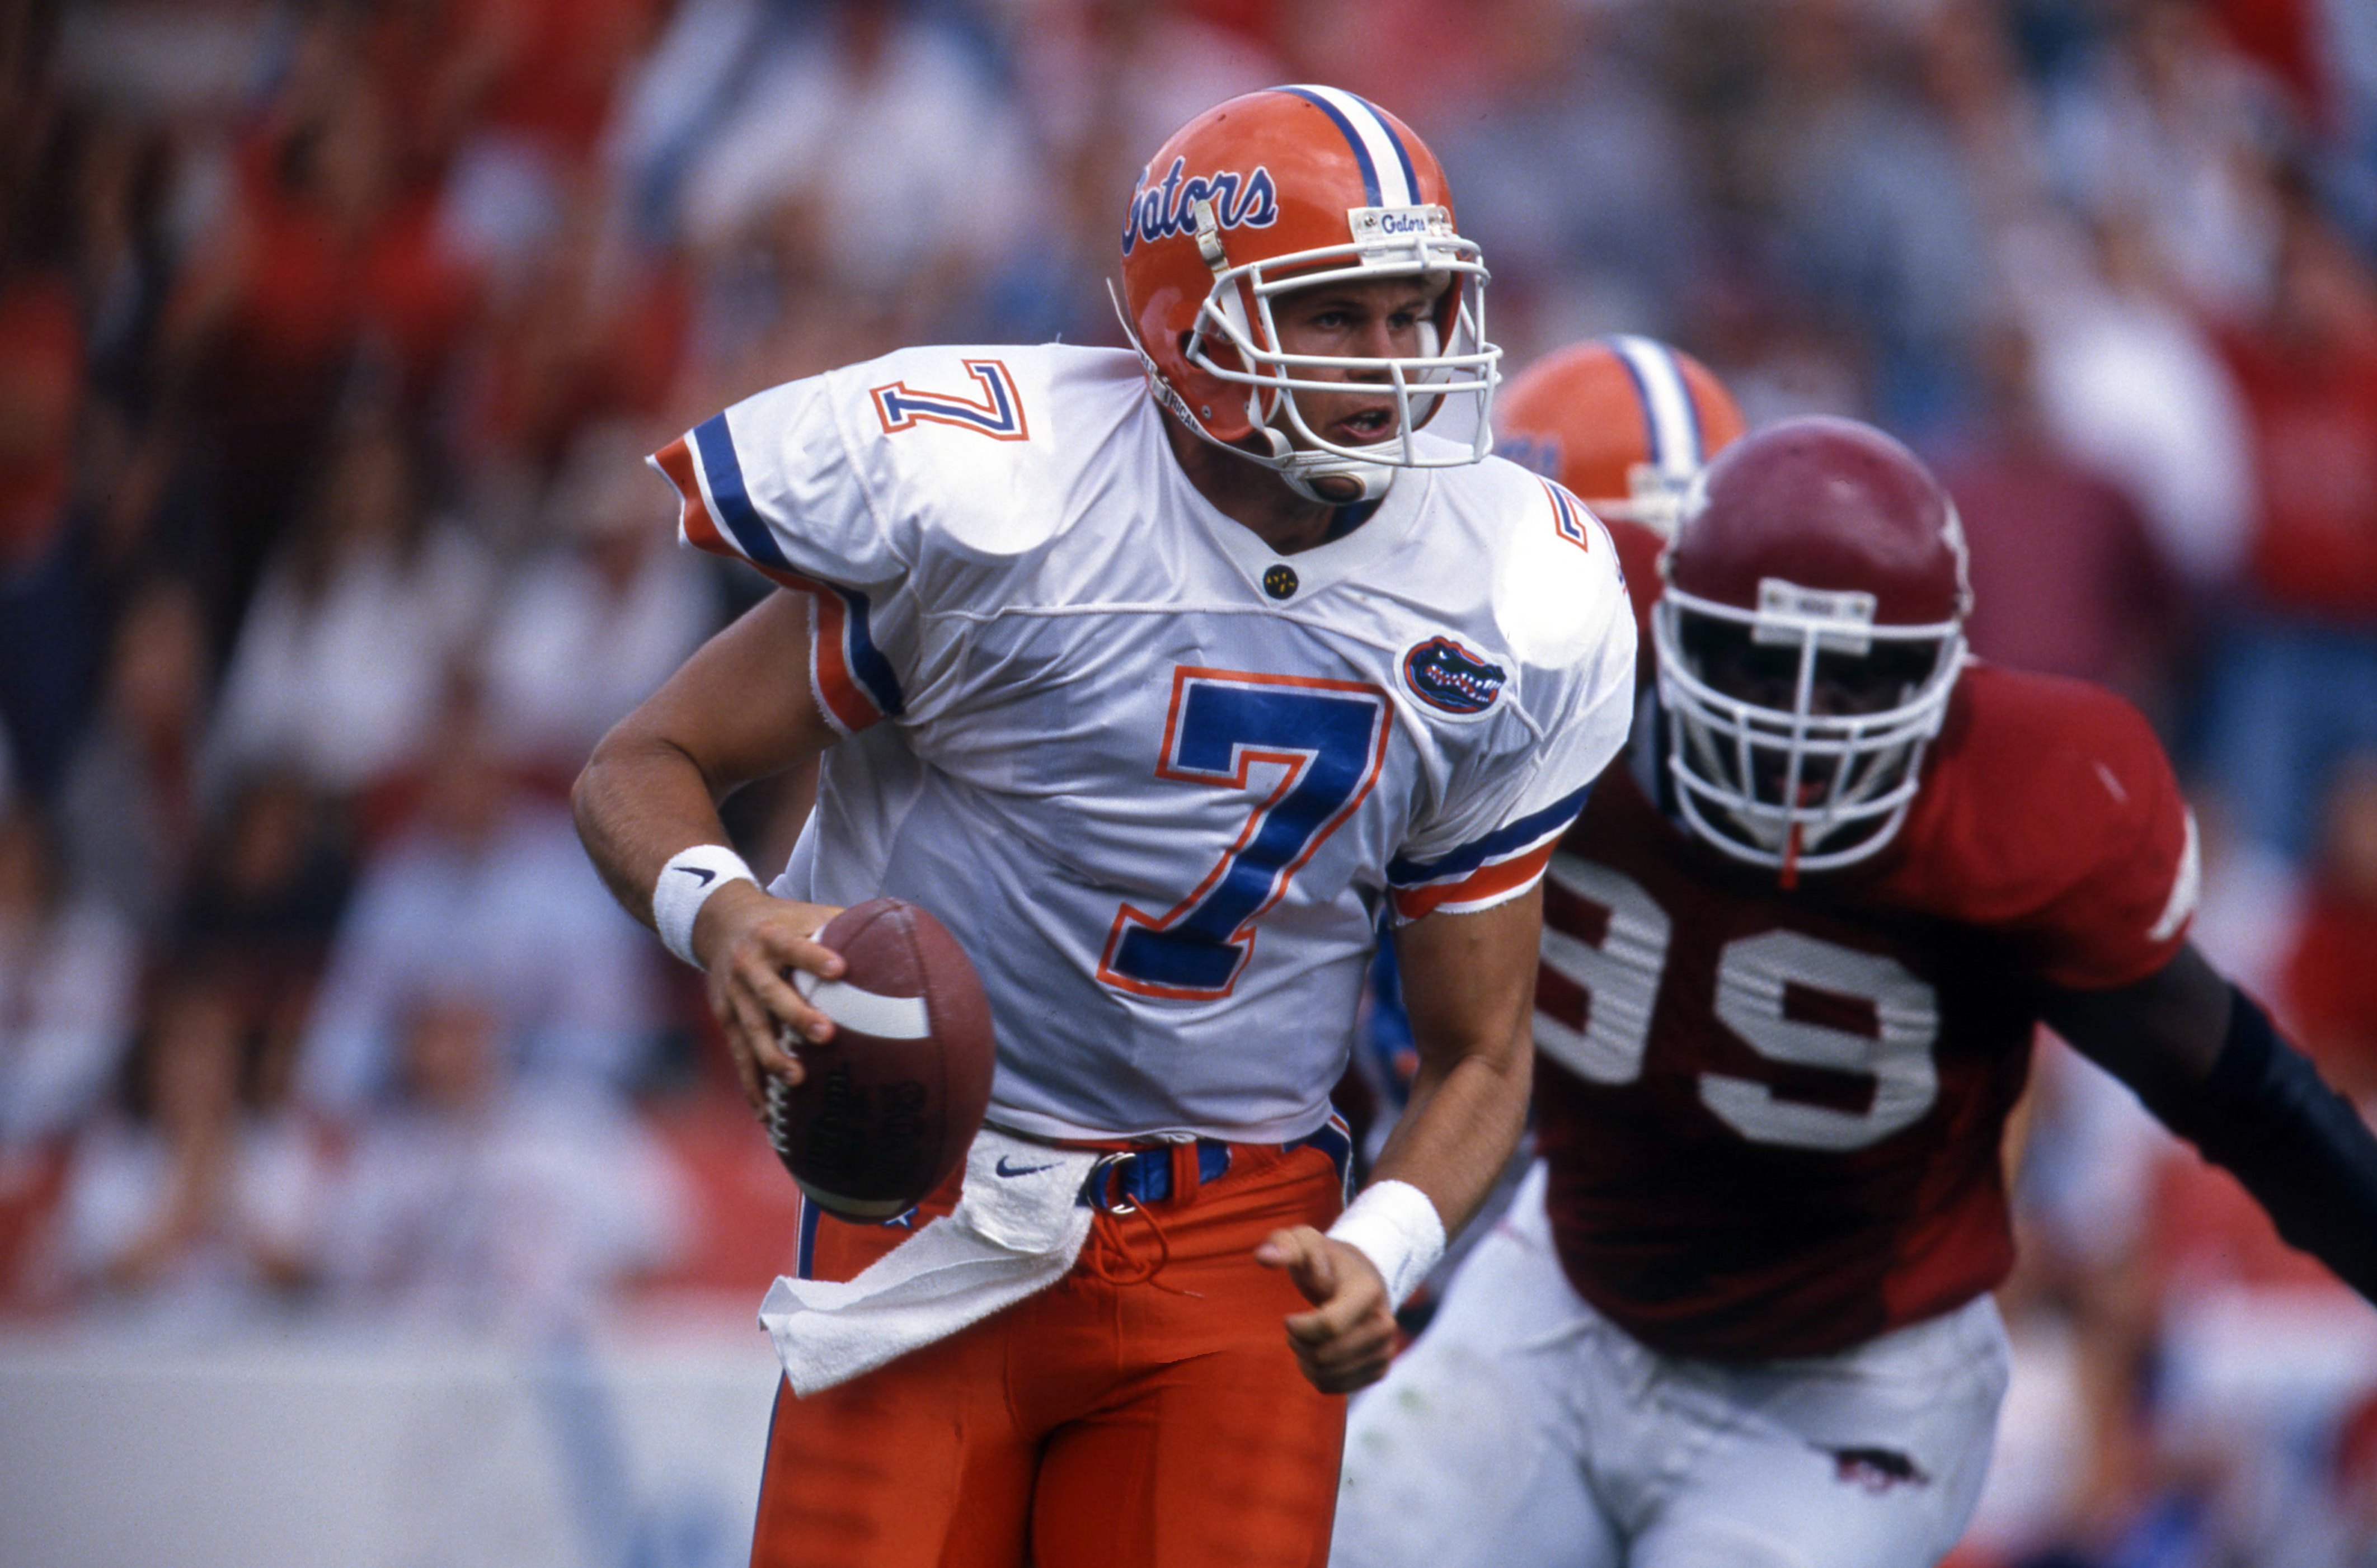 Quarterback Danny Wuerffel #7 of the Florida Gators runs with the ball Arkansas in 1996. (Photo by Andy Lyons/Getty Images)